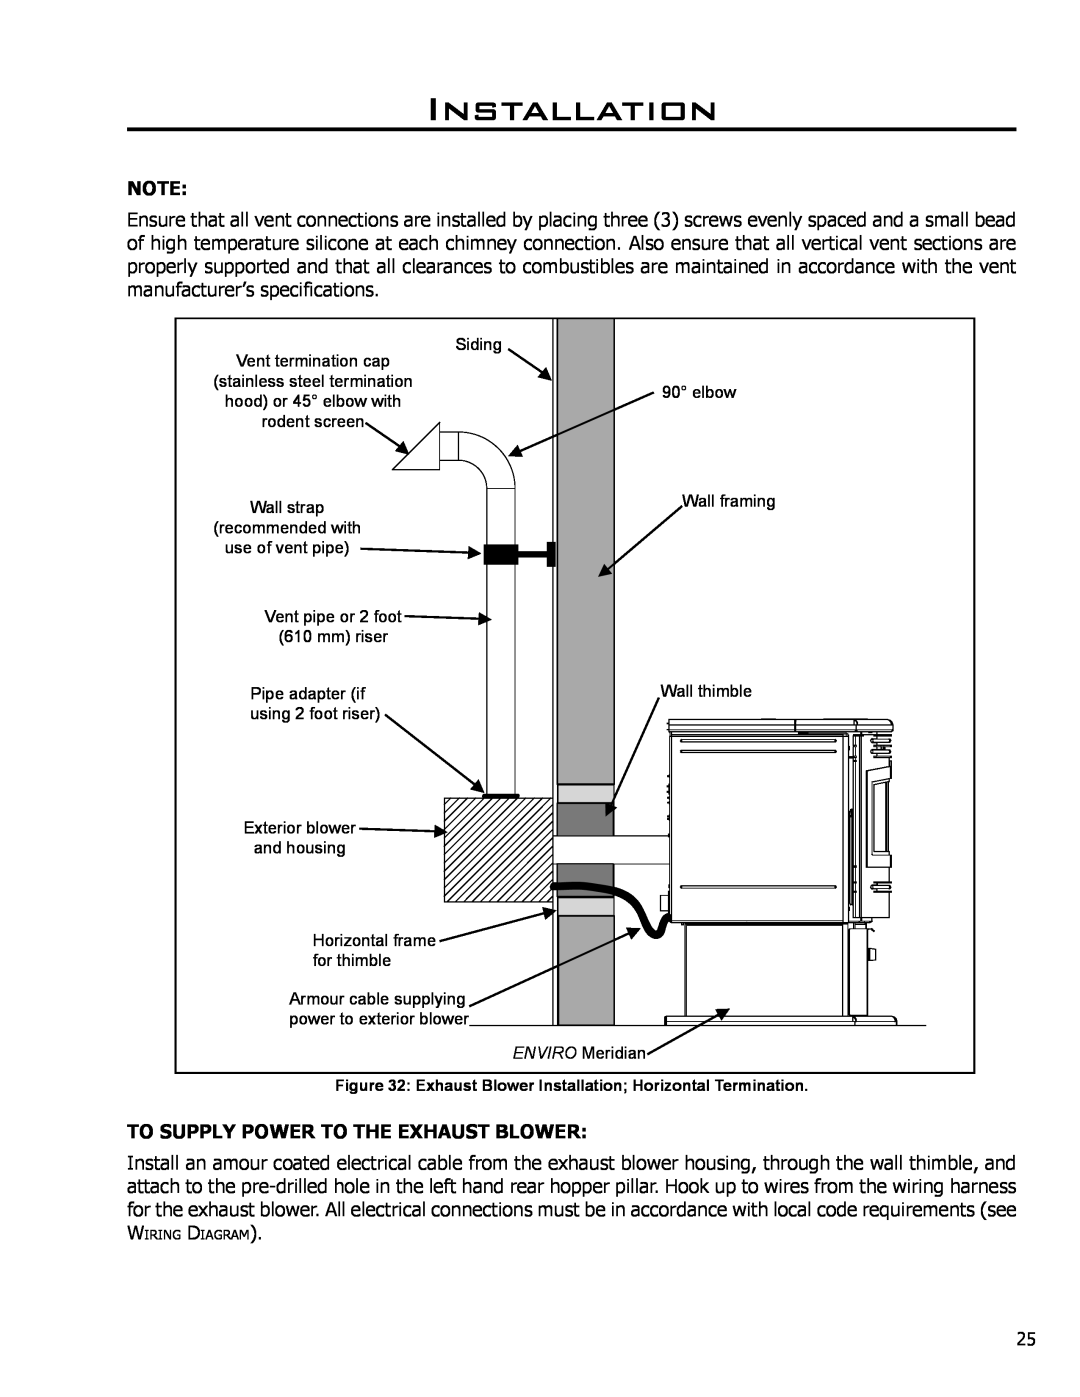 Enviro Meridian owner manual To Supply Power To The Exhaust Blower, Installation 